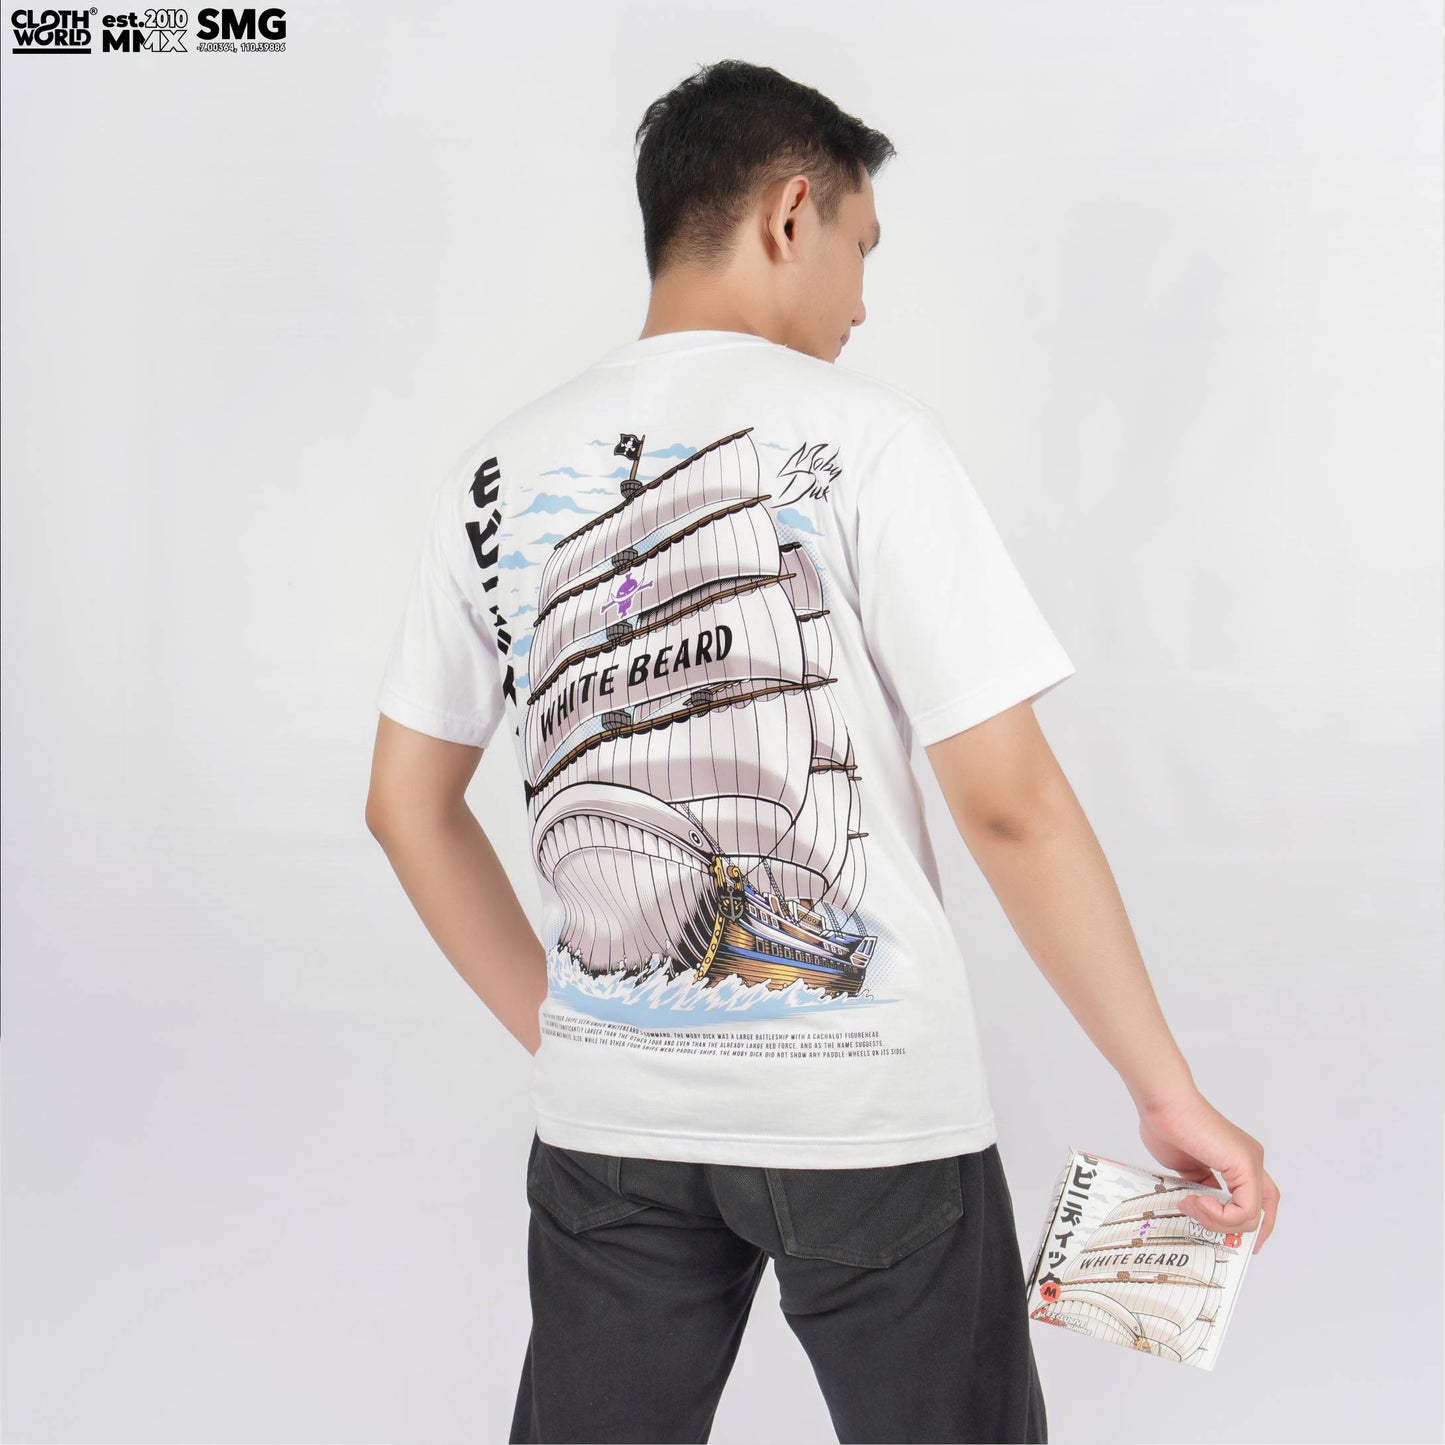 Moby Dick T-Shirt